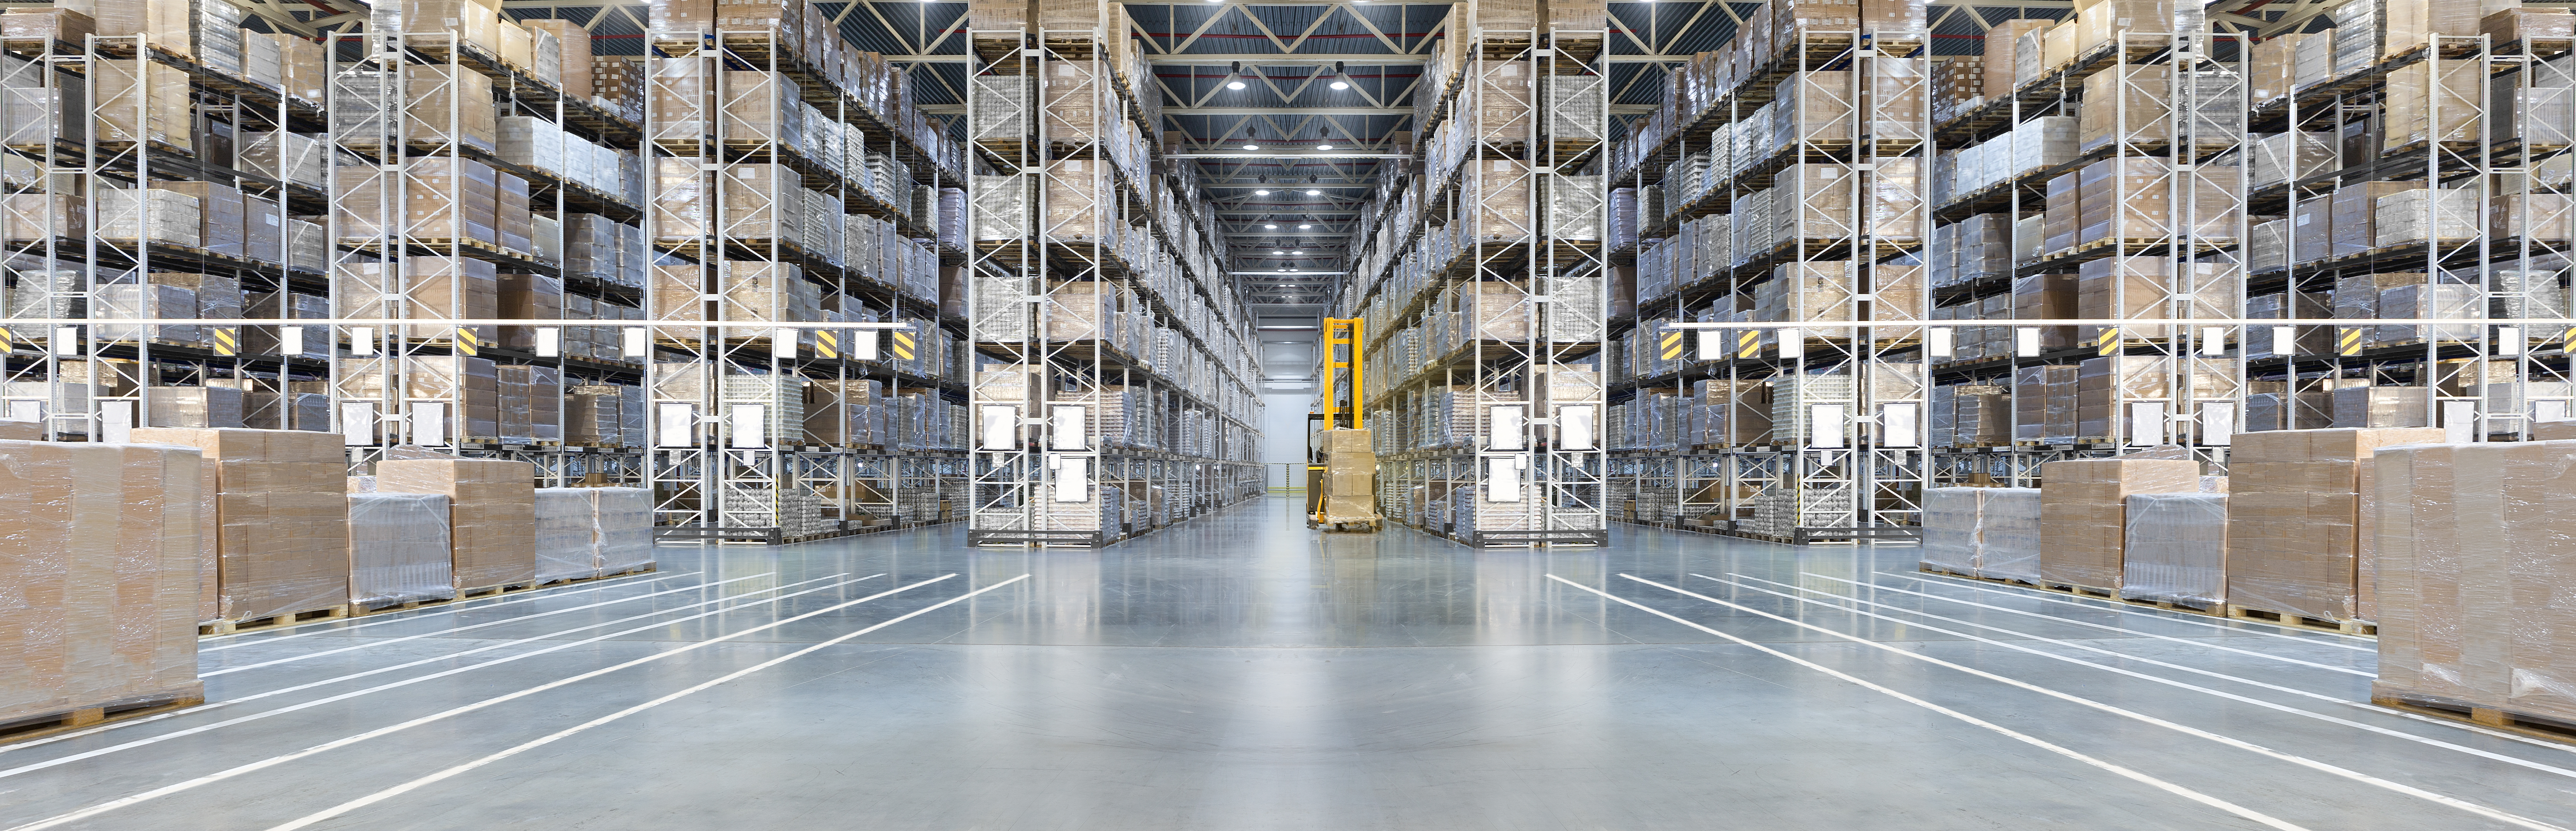 Siggins offers many services from making your warehouse distribution facility safer to saving money with LED lighting.